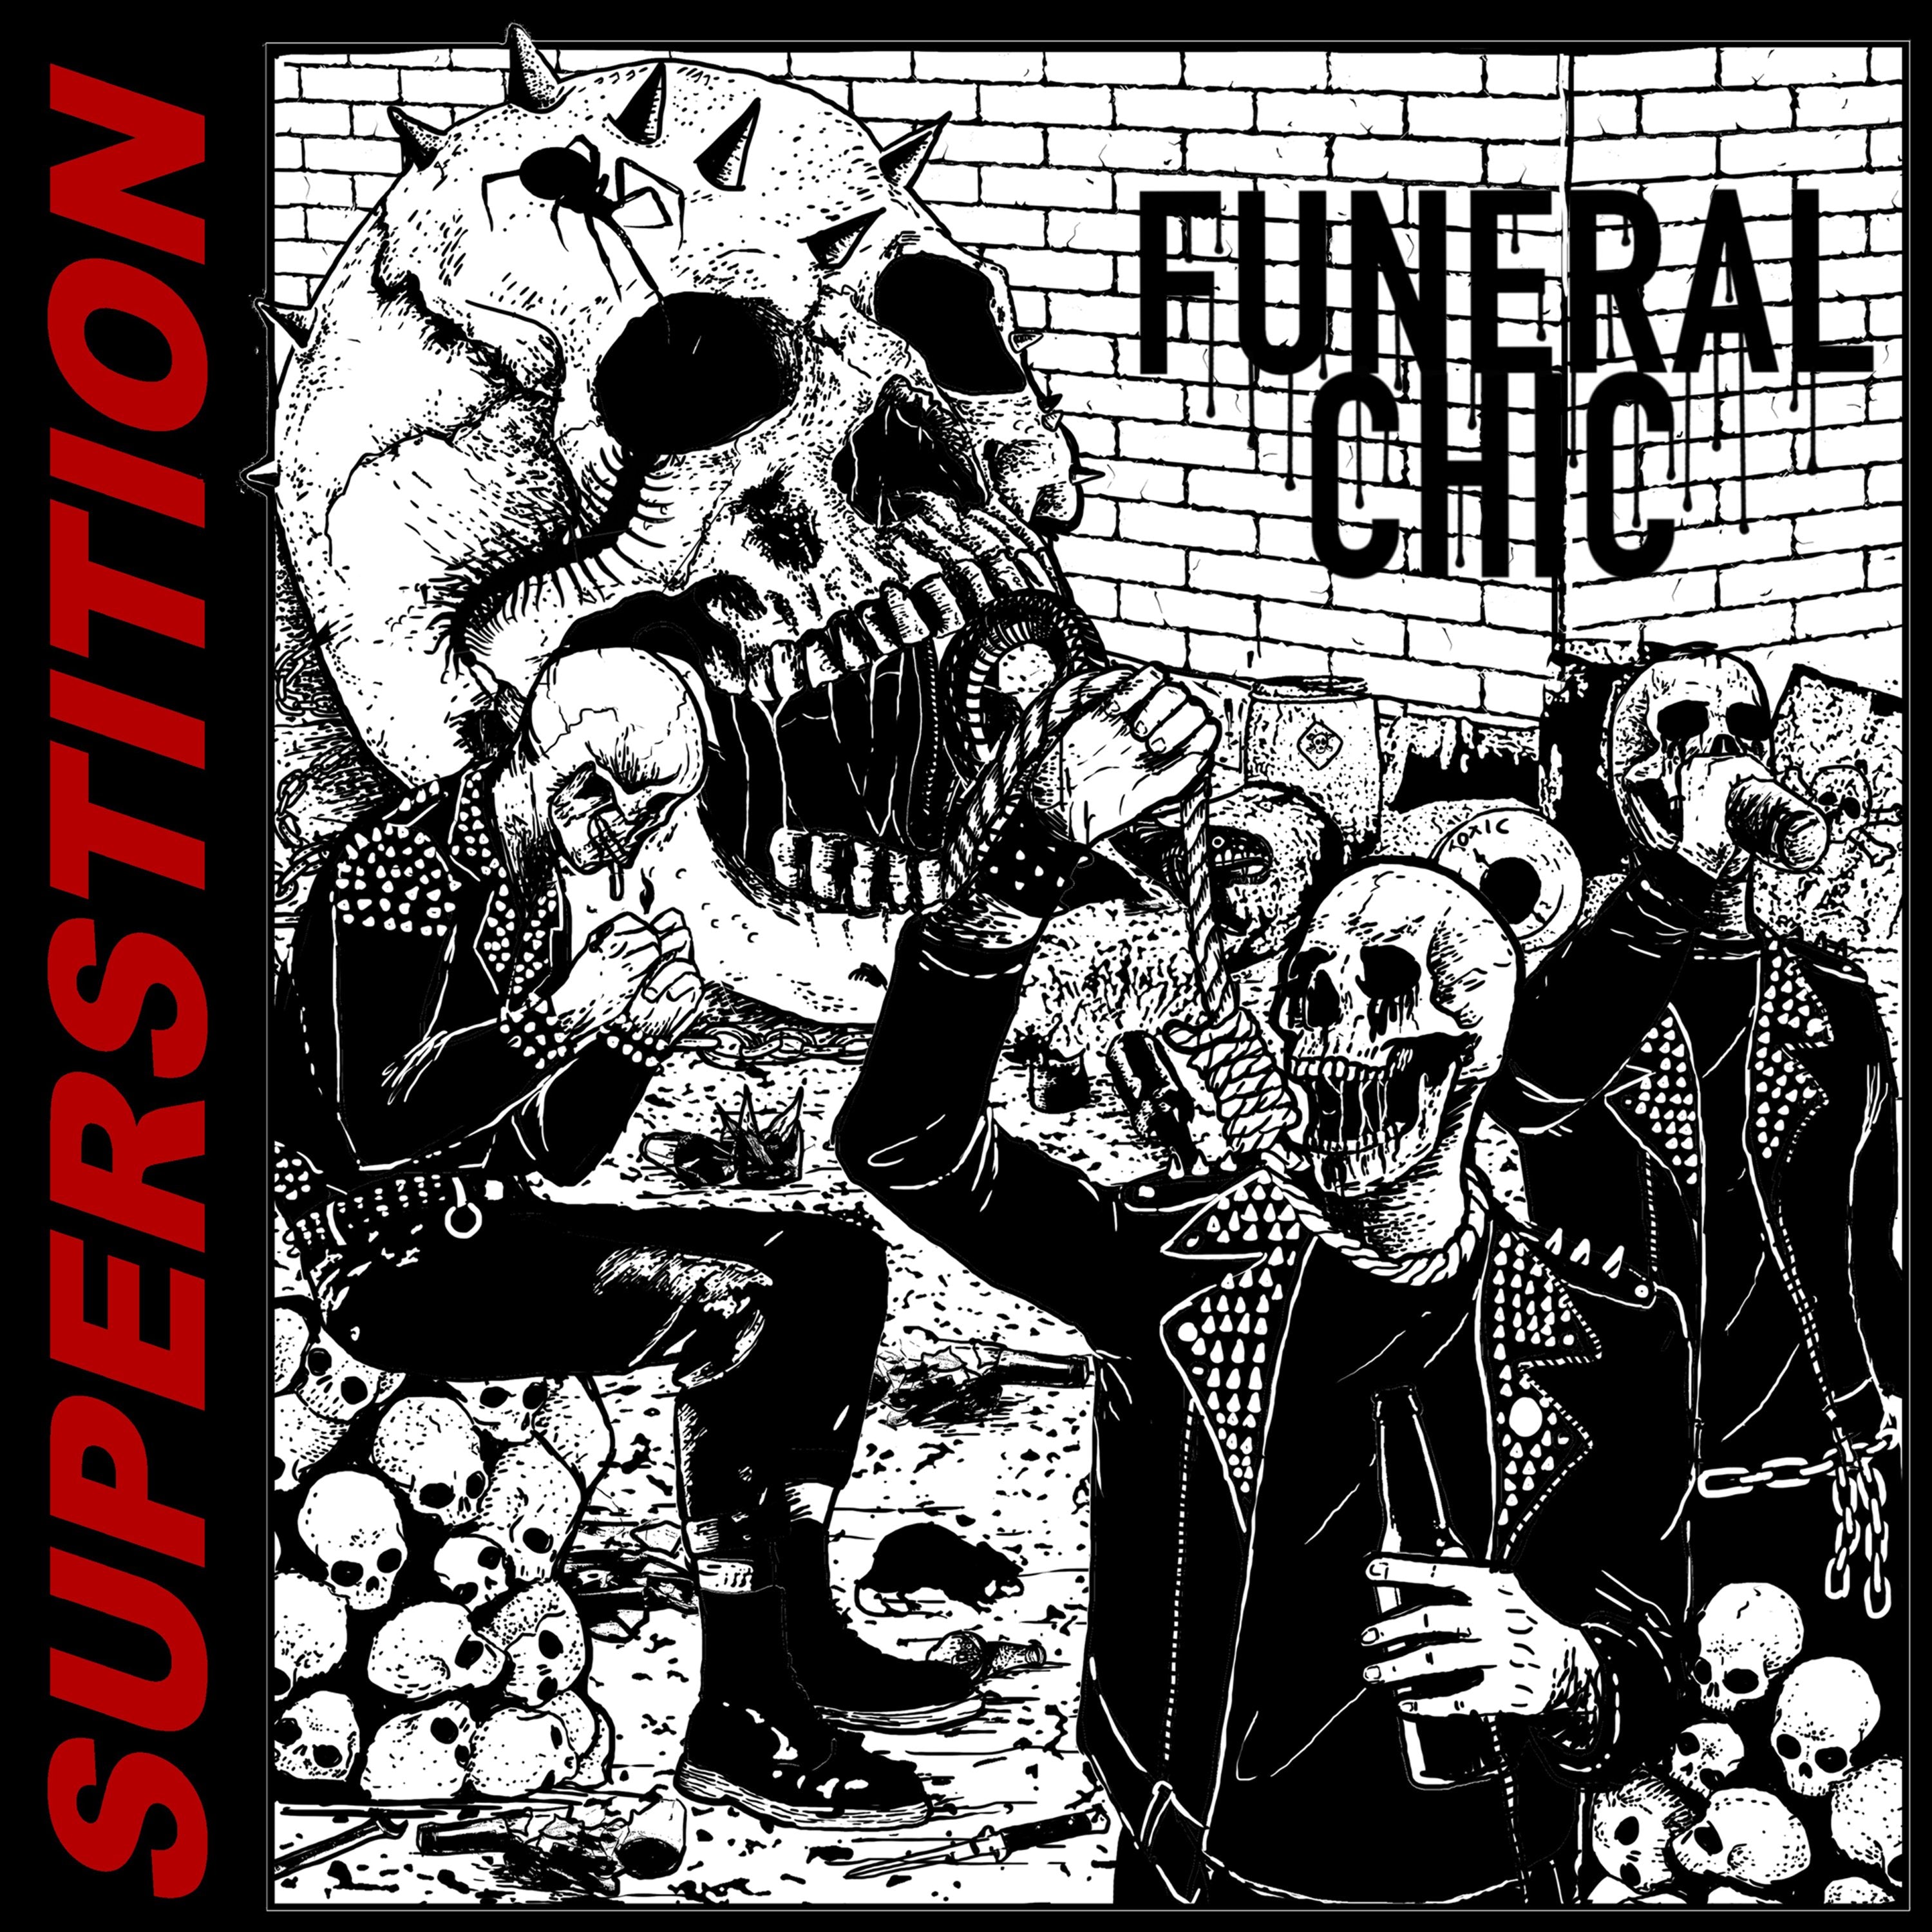 Funeral Chic - Superstition